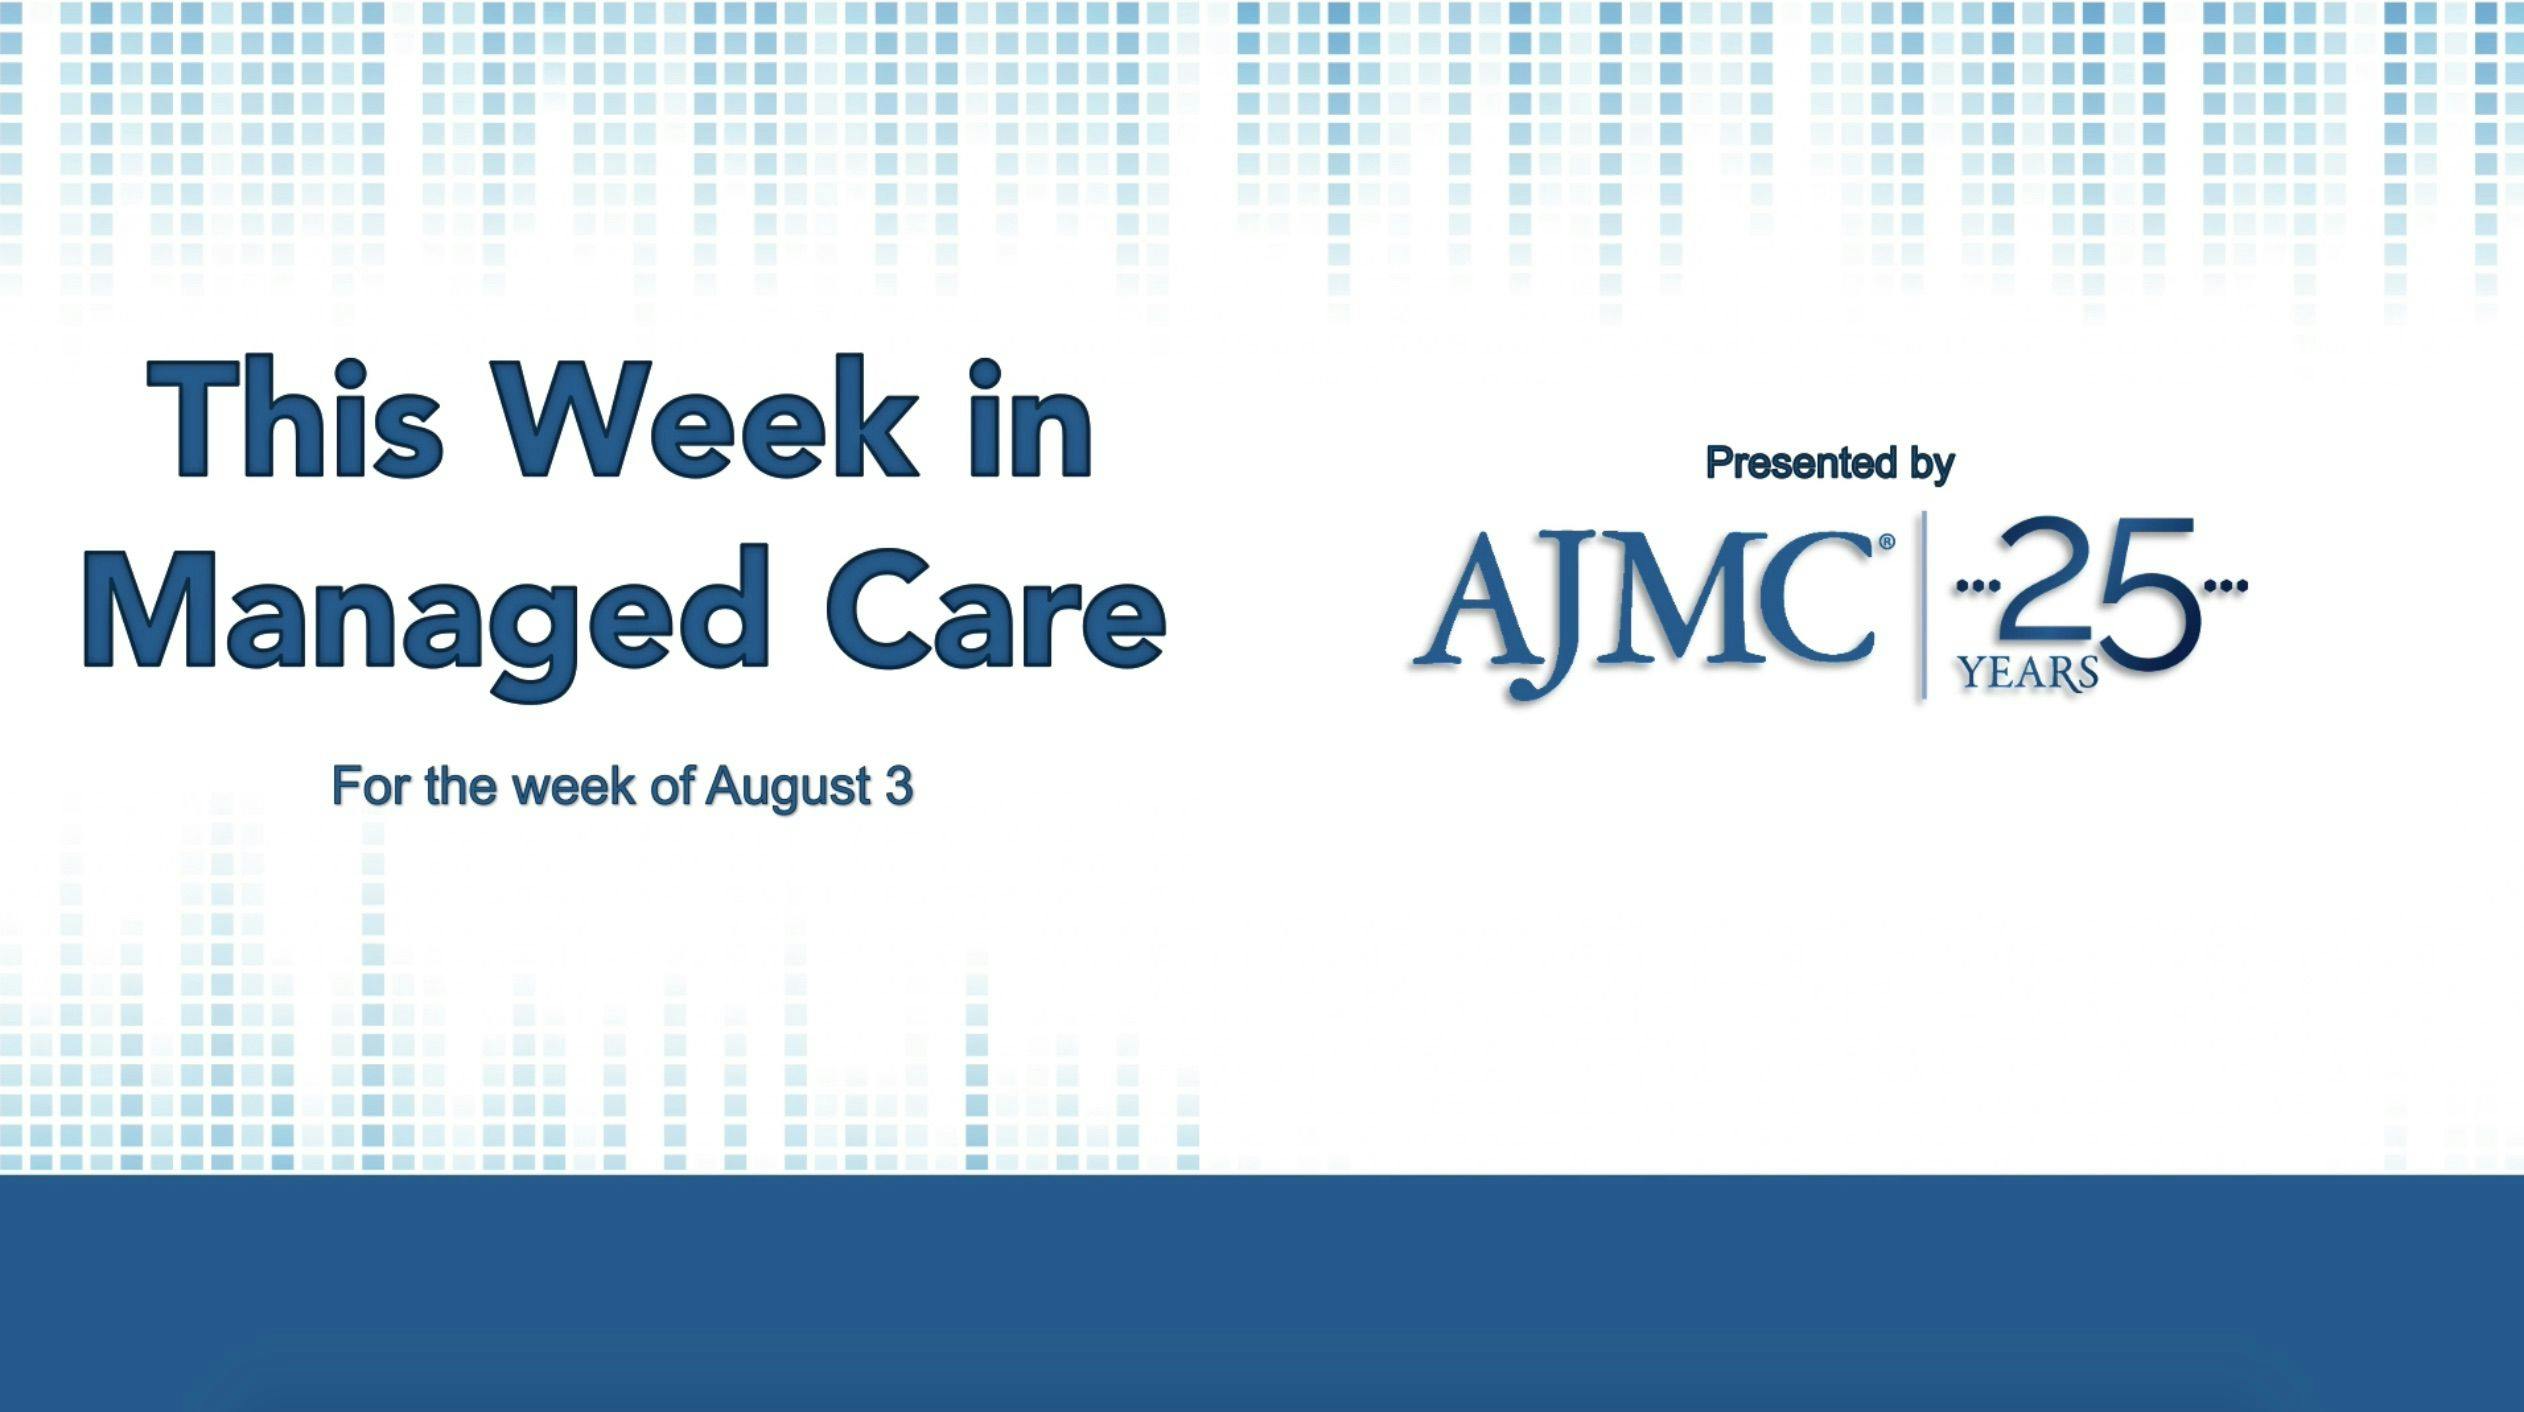 This Week in Managed Care: August 7, 2020